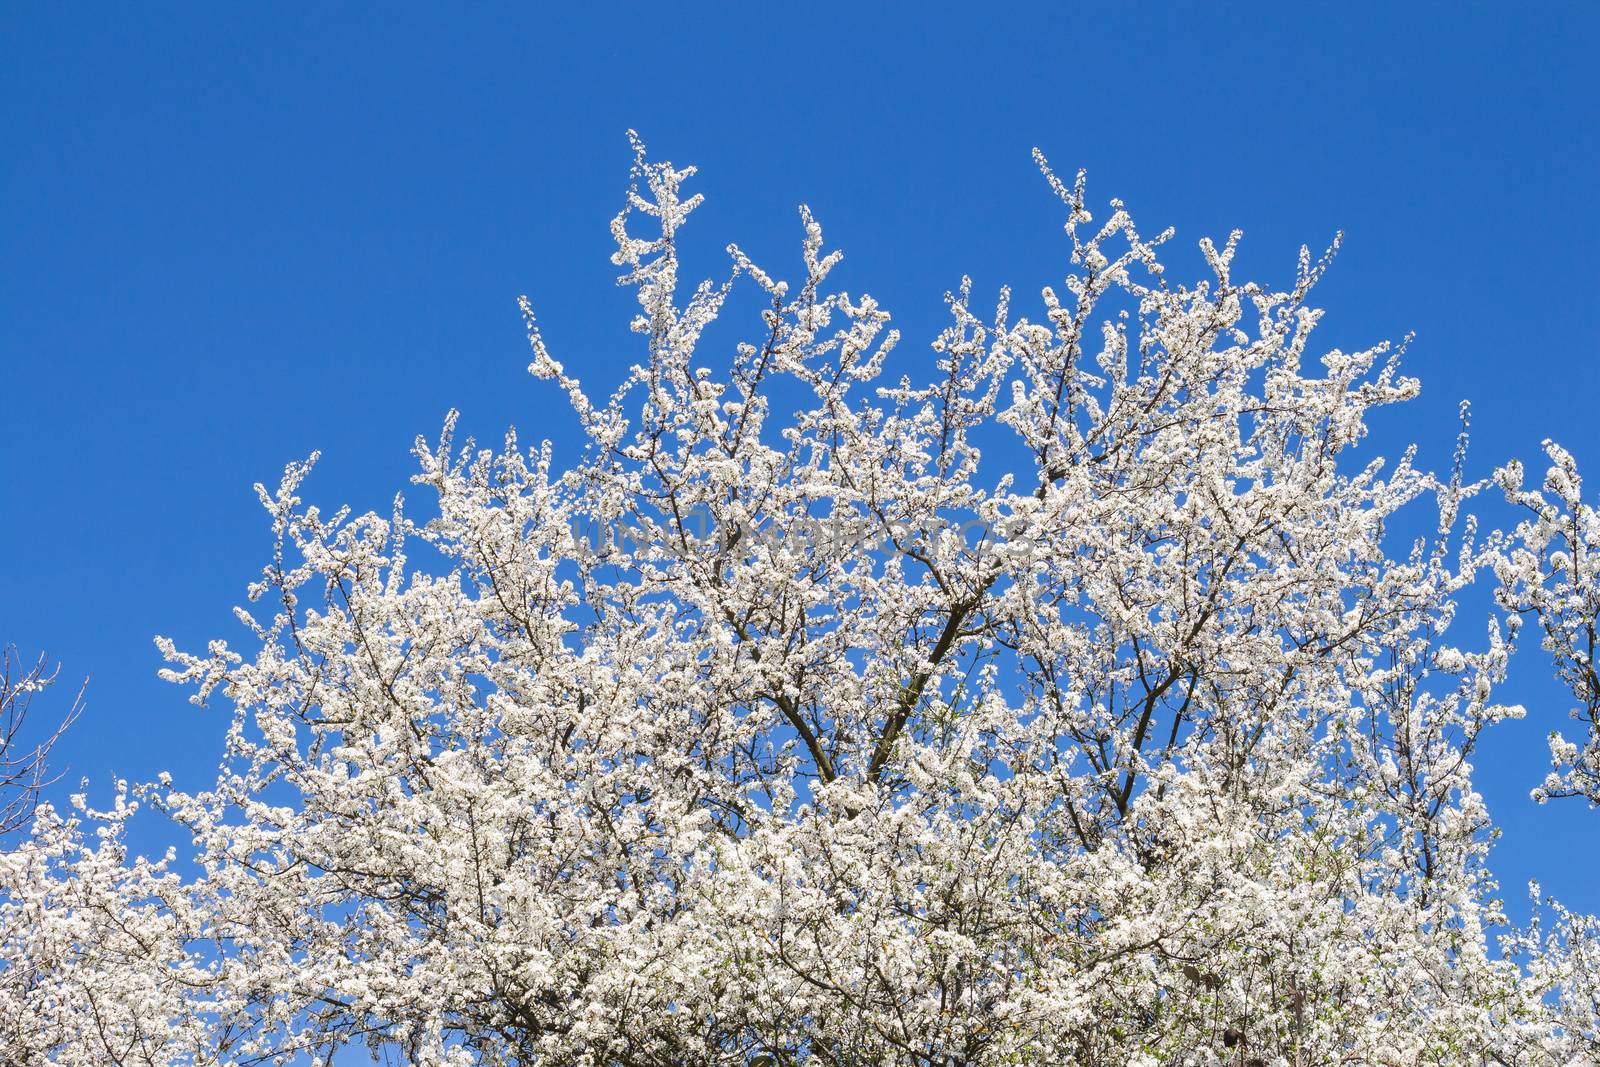 Crown of the blossoming wild fruits tree in the early spring. White small flowers and bright blue sky without a single cloud.